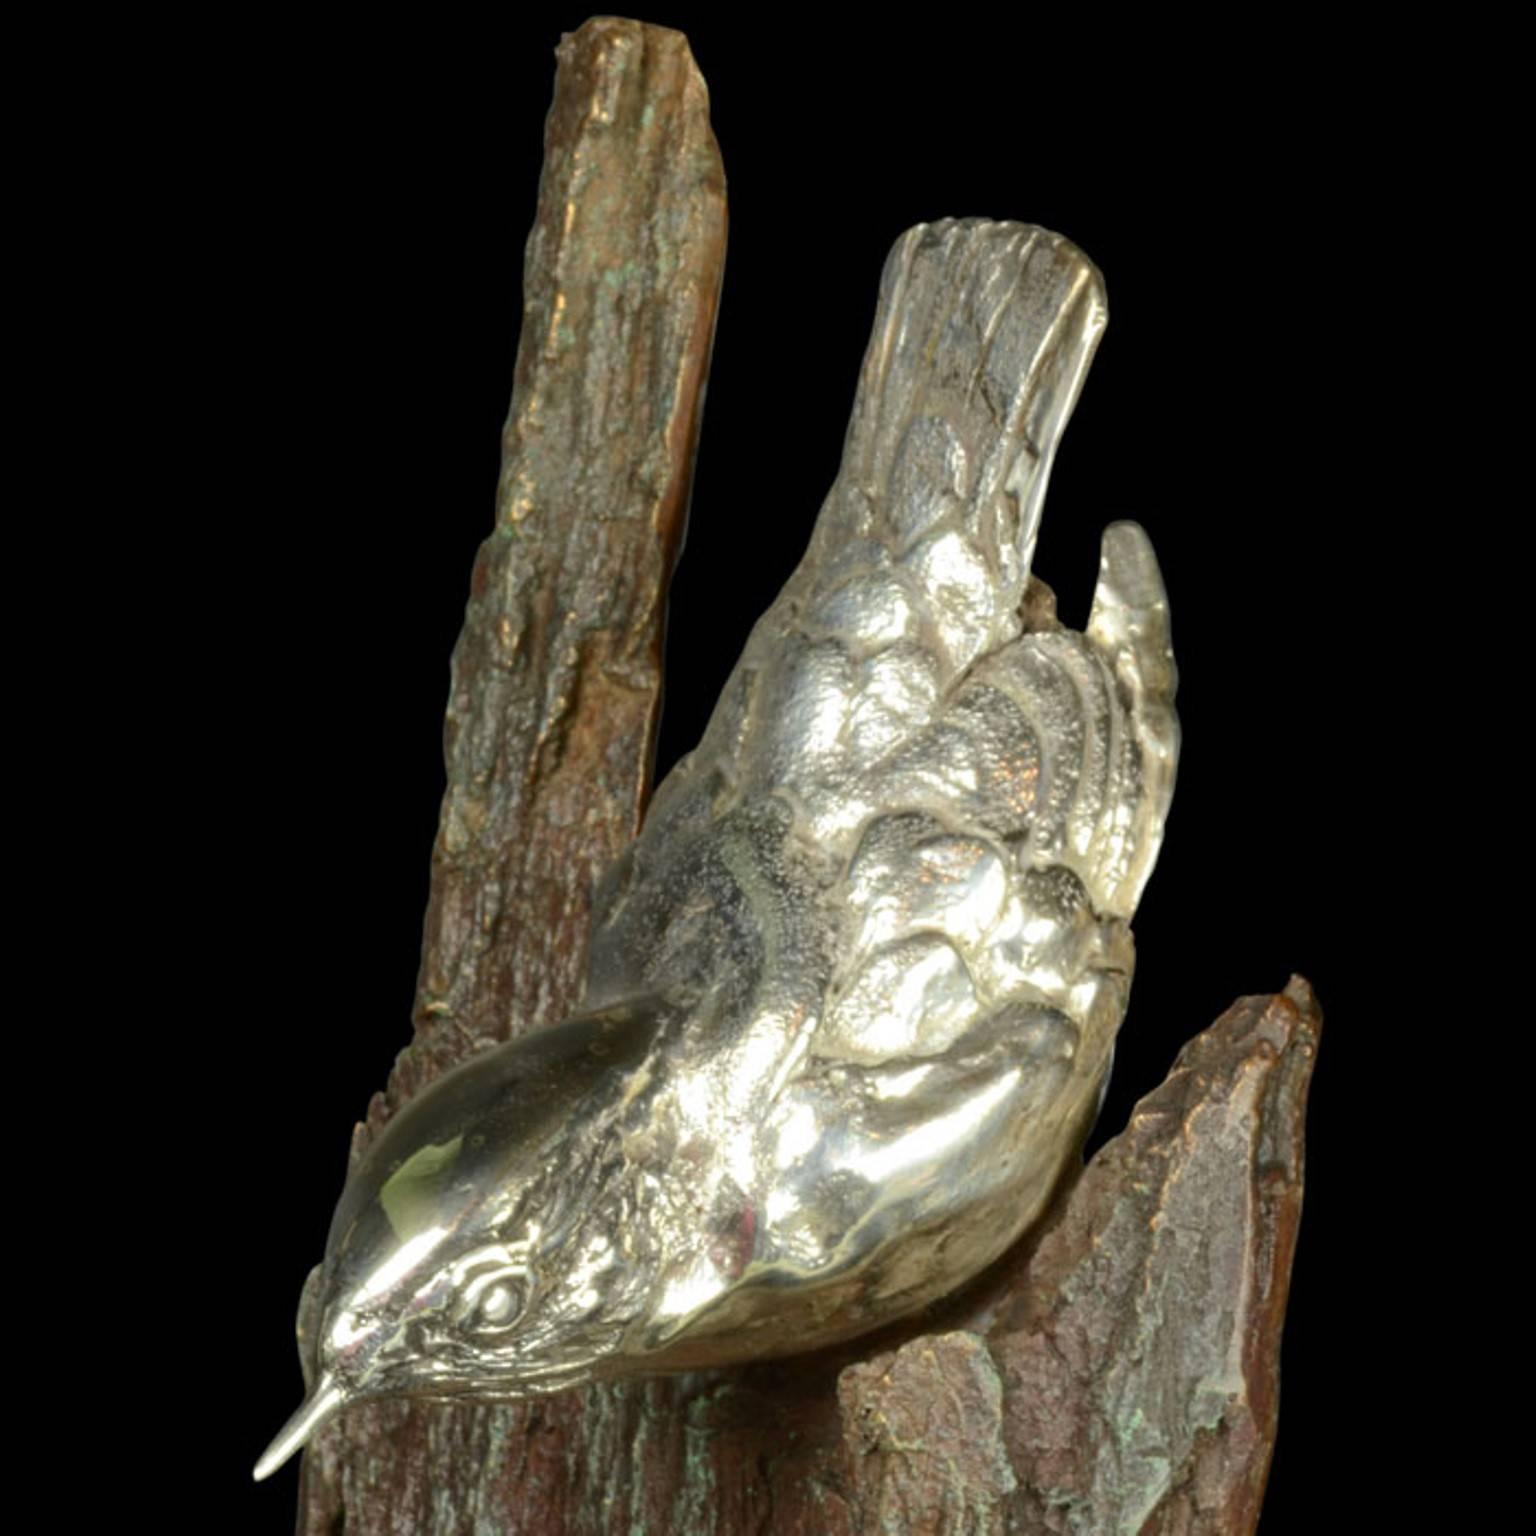 A finely modelled sterling silver Nuthatch on a bronze bark - Black Figurative Sculpture by Ian Bowles